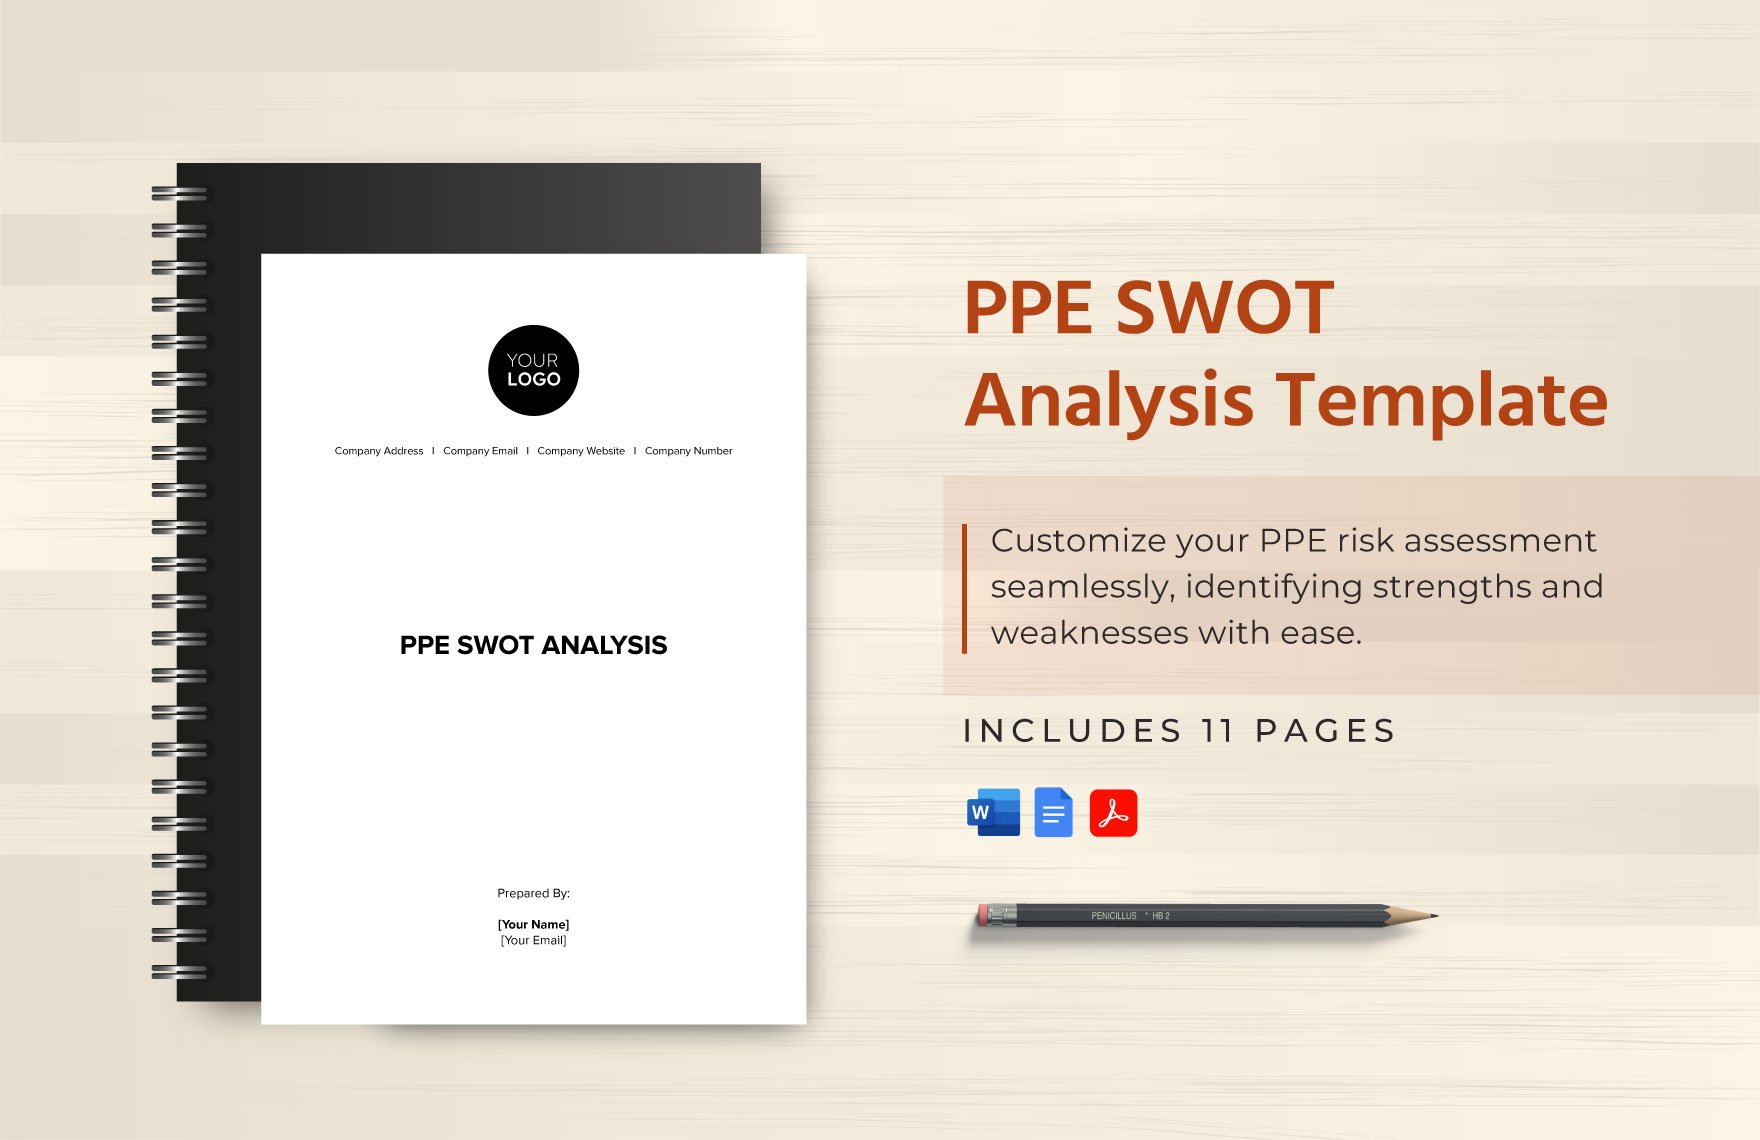 PPE SWOT Analysis Template